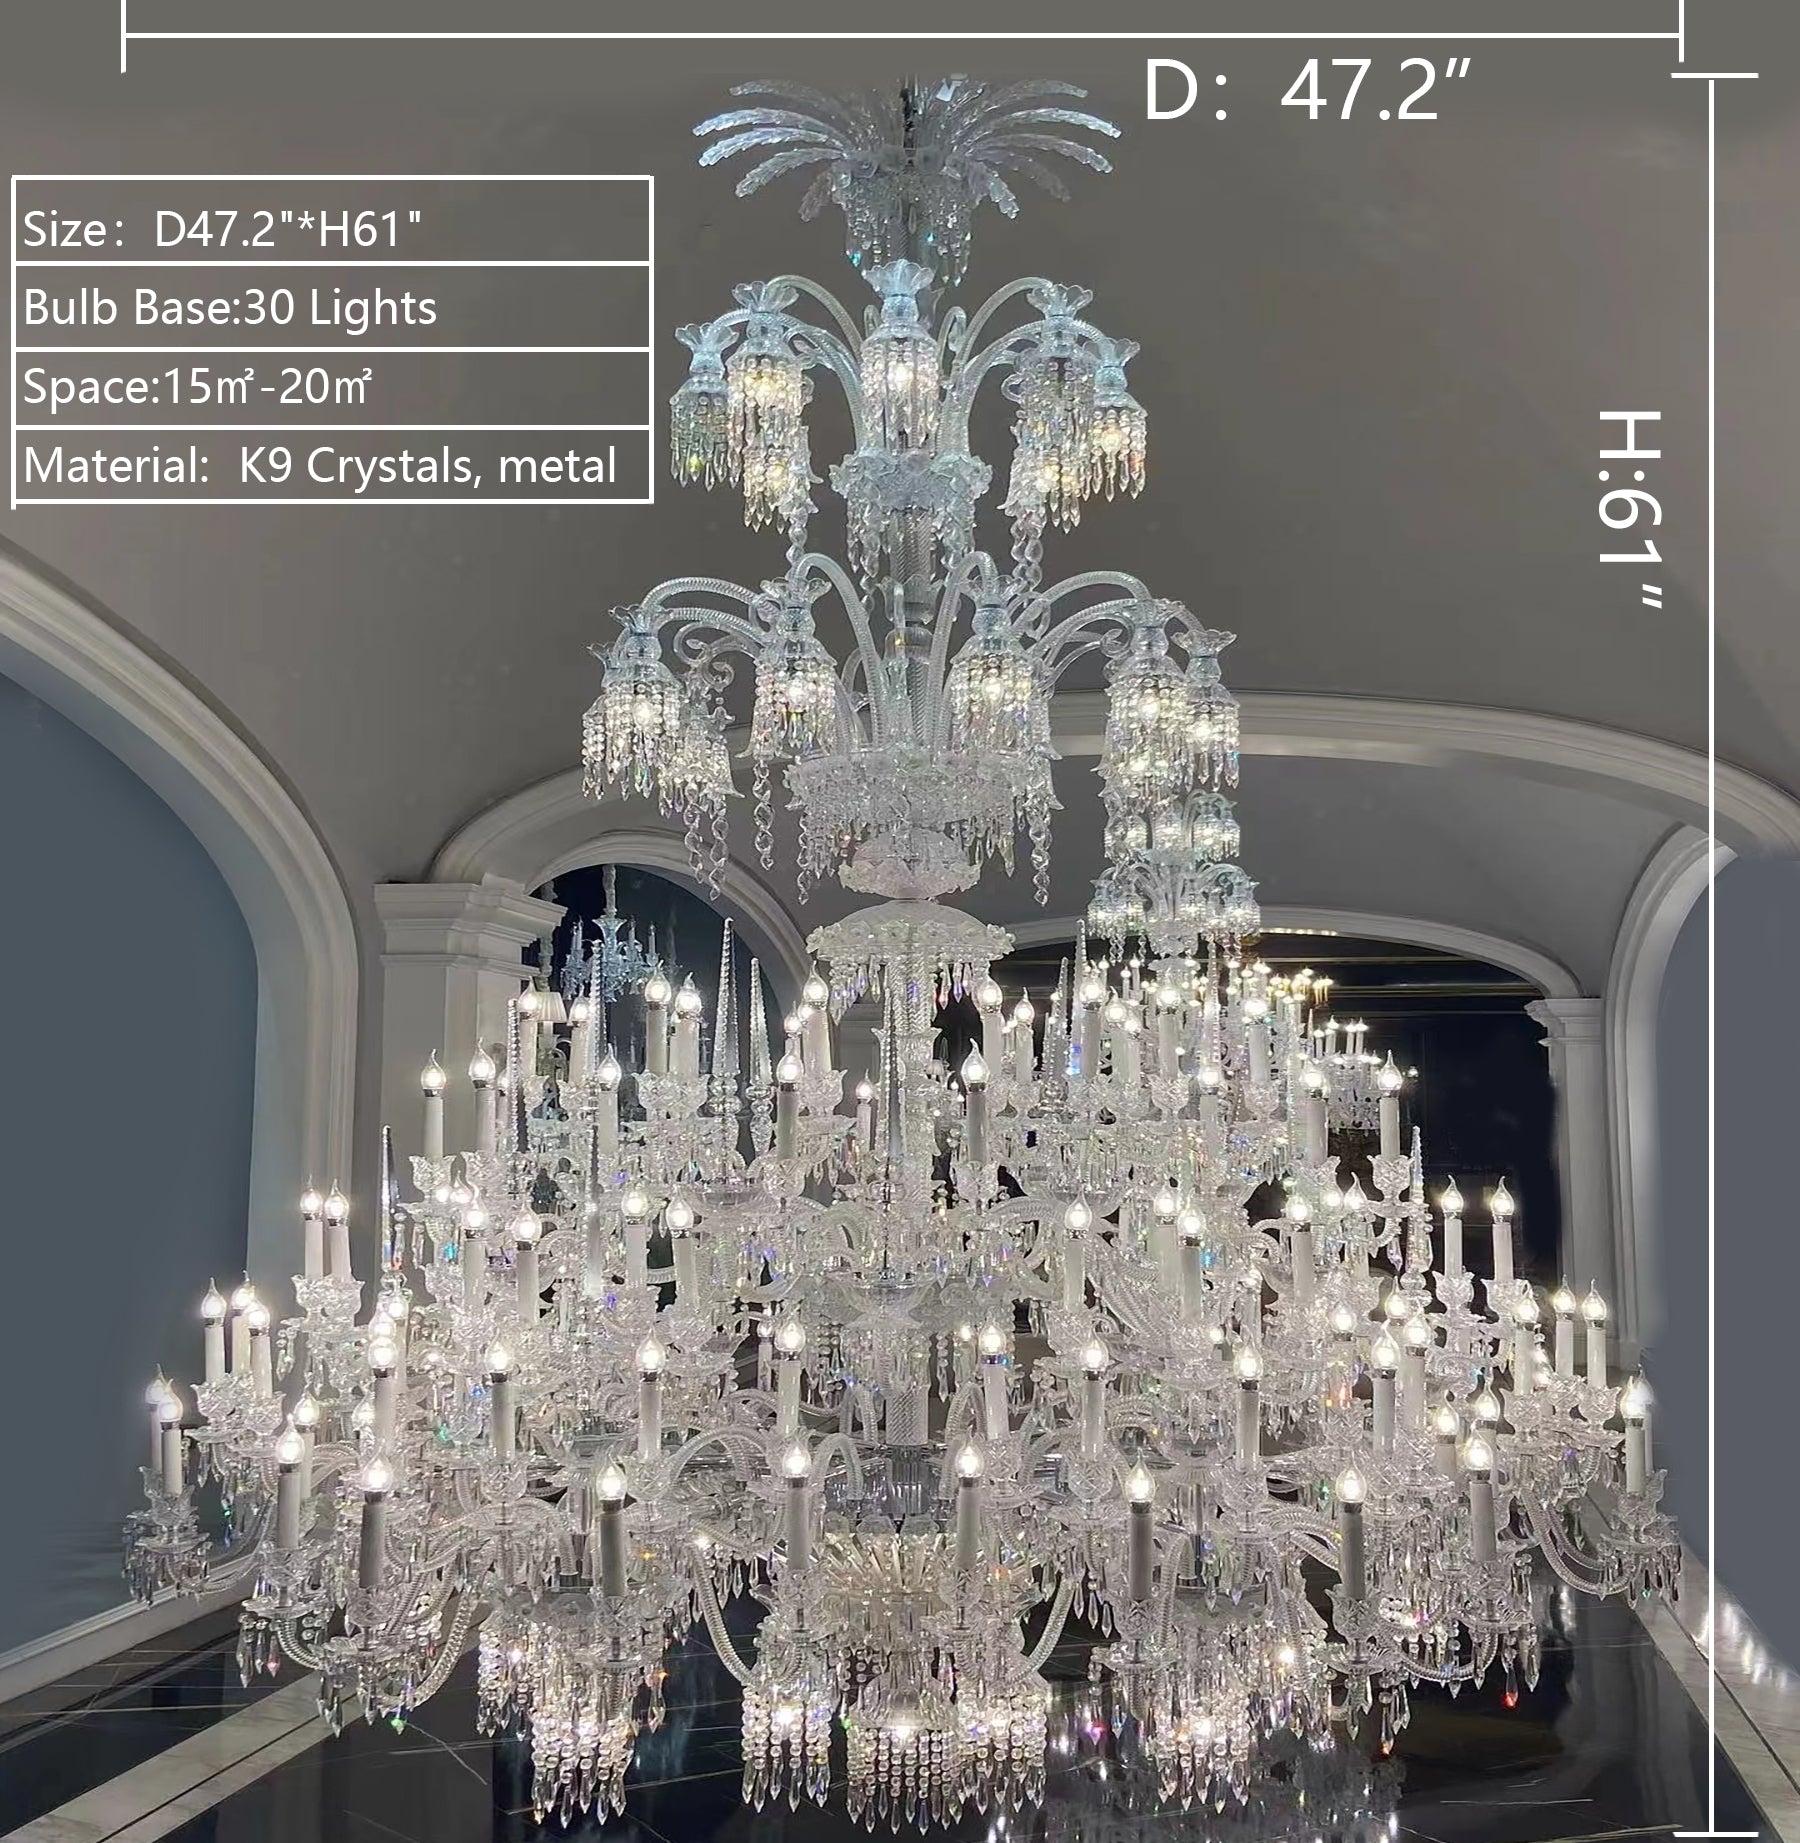 D47.2"*H61" large candle crystal chandelier modern  round style light lamps for  villa entrance/hotel lobby/extravagant villa dining room